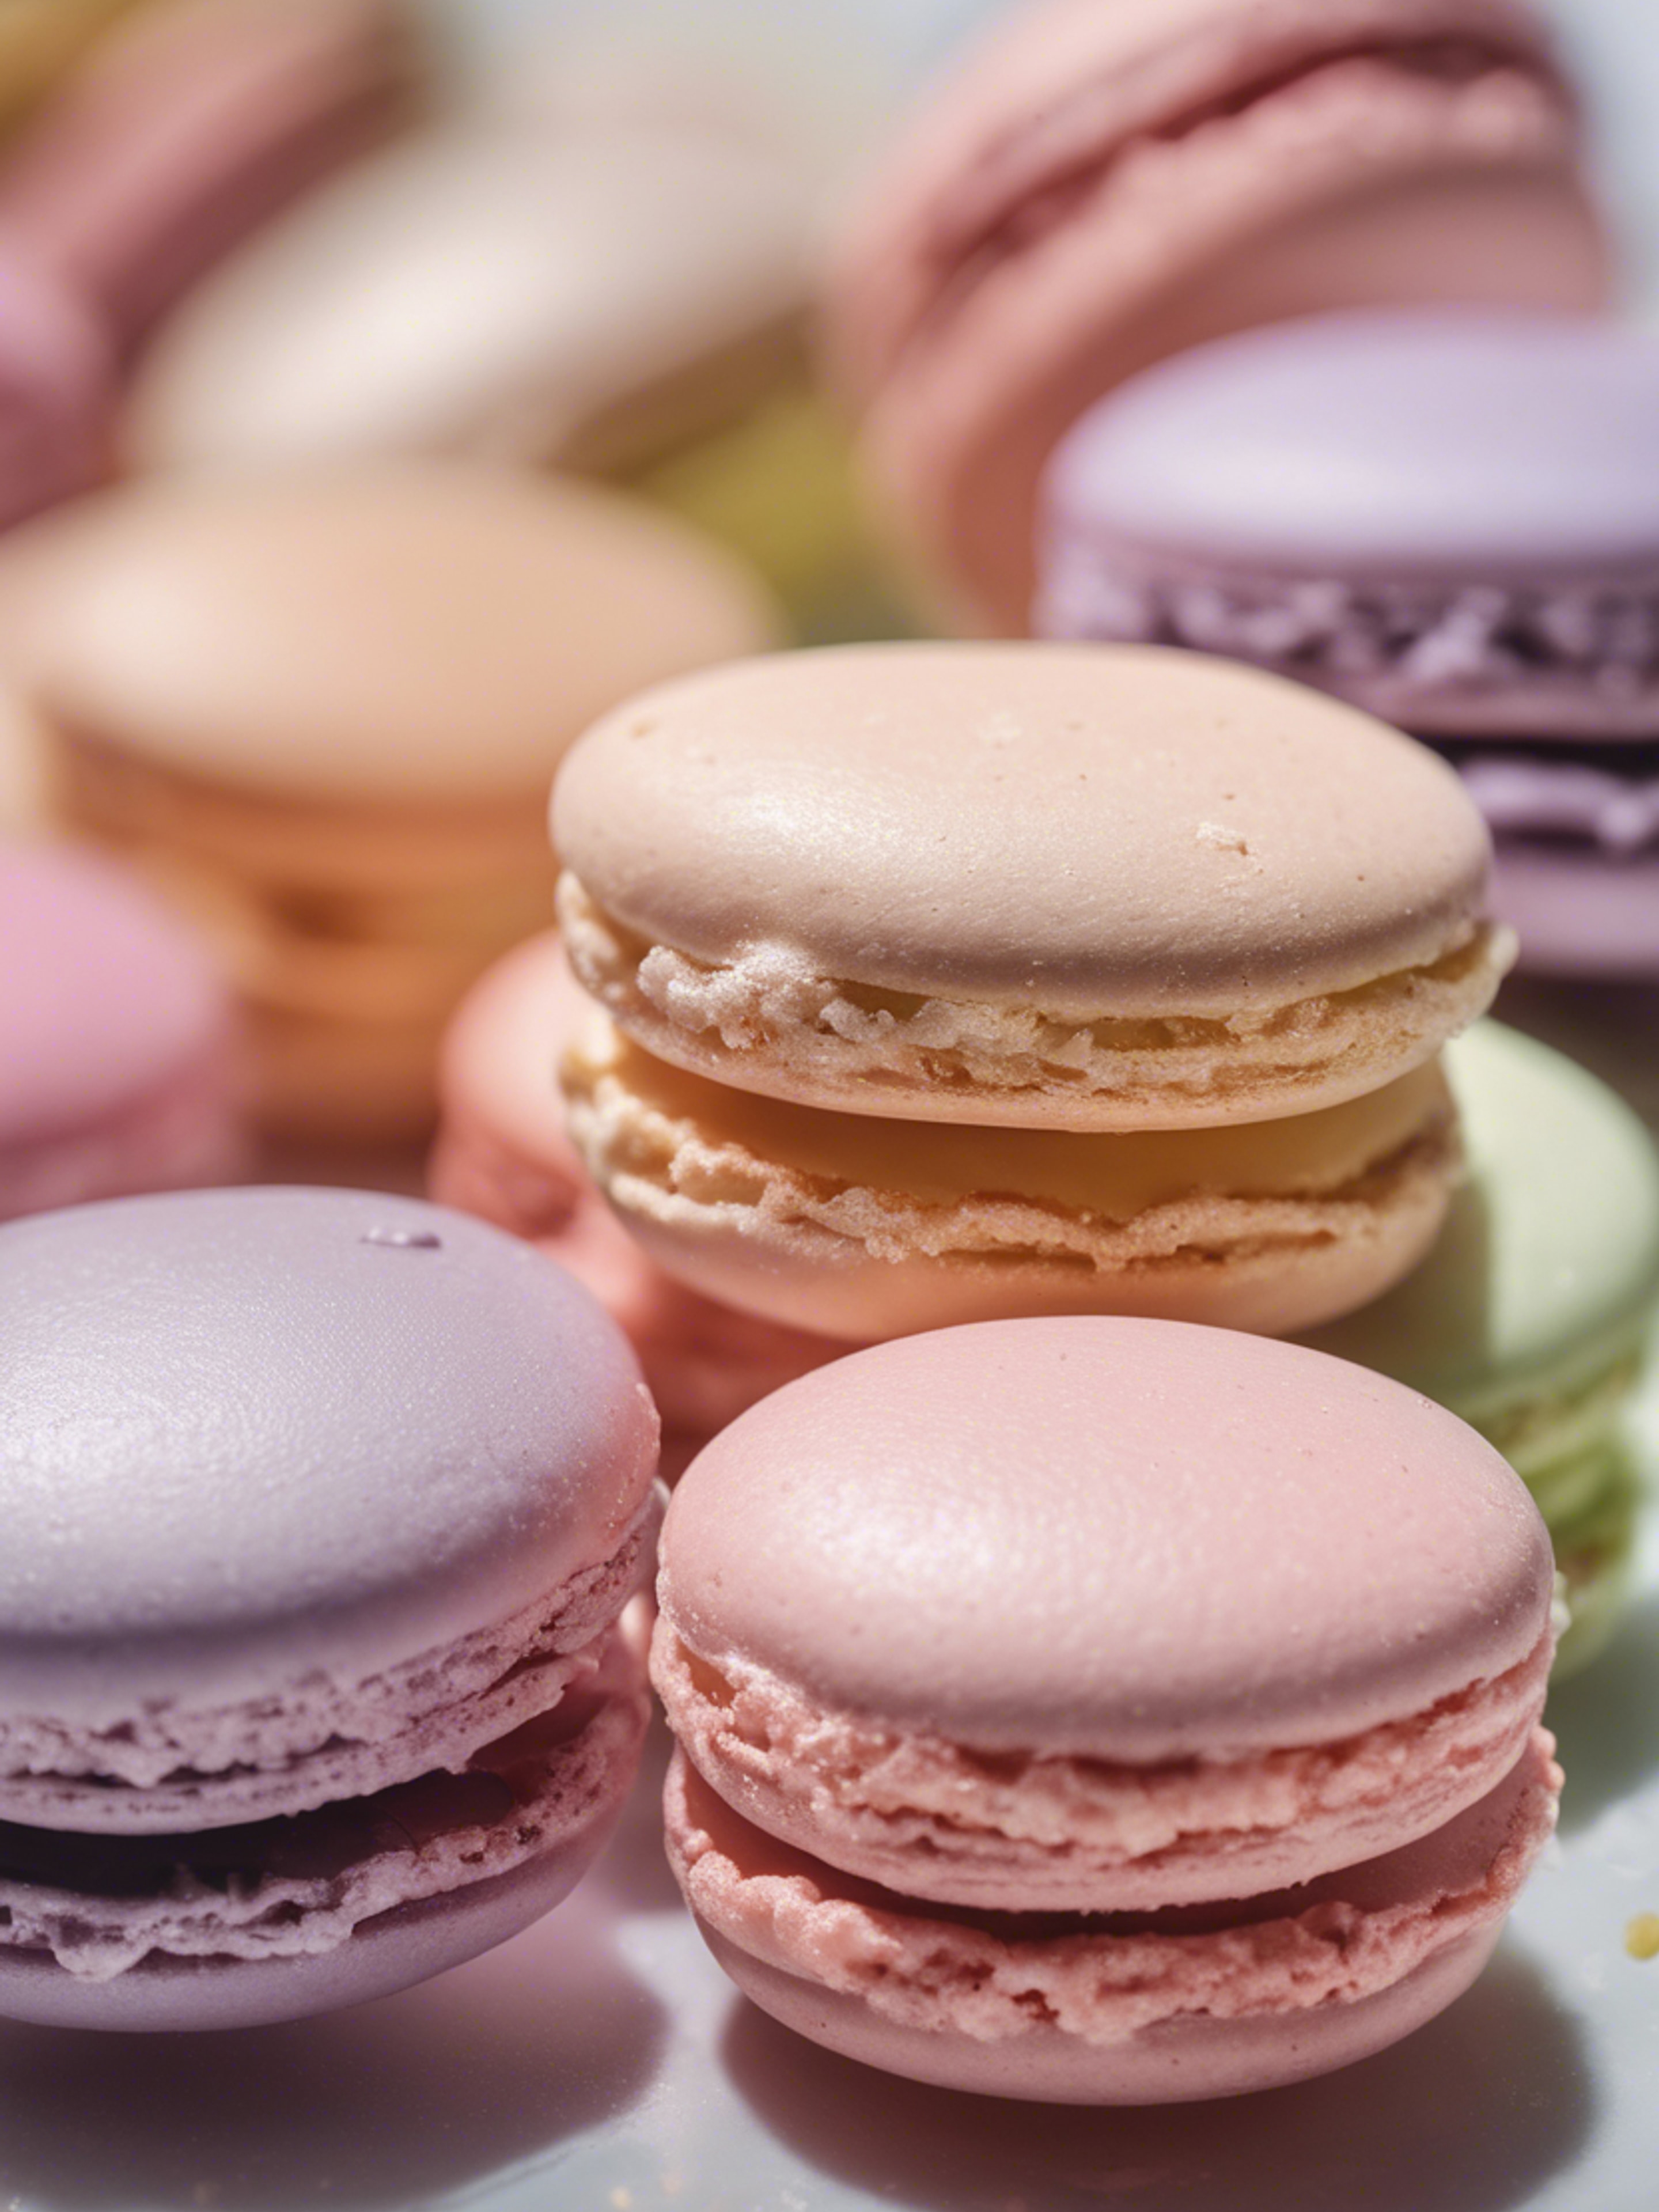 A close-up view of a cool pastel colored macaron making process. Обои[347d58695ee94000a1fc]